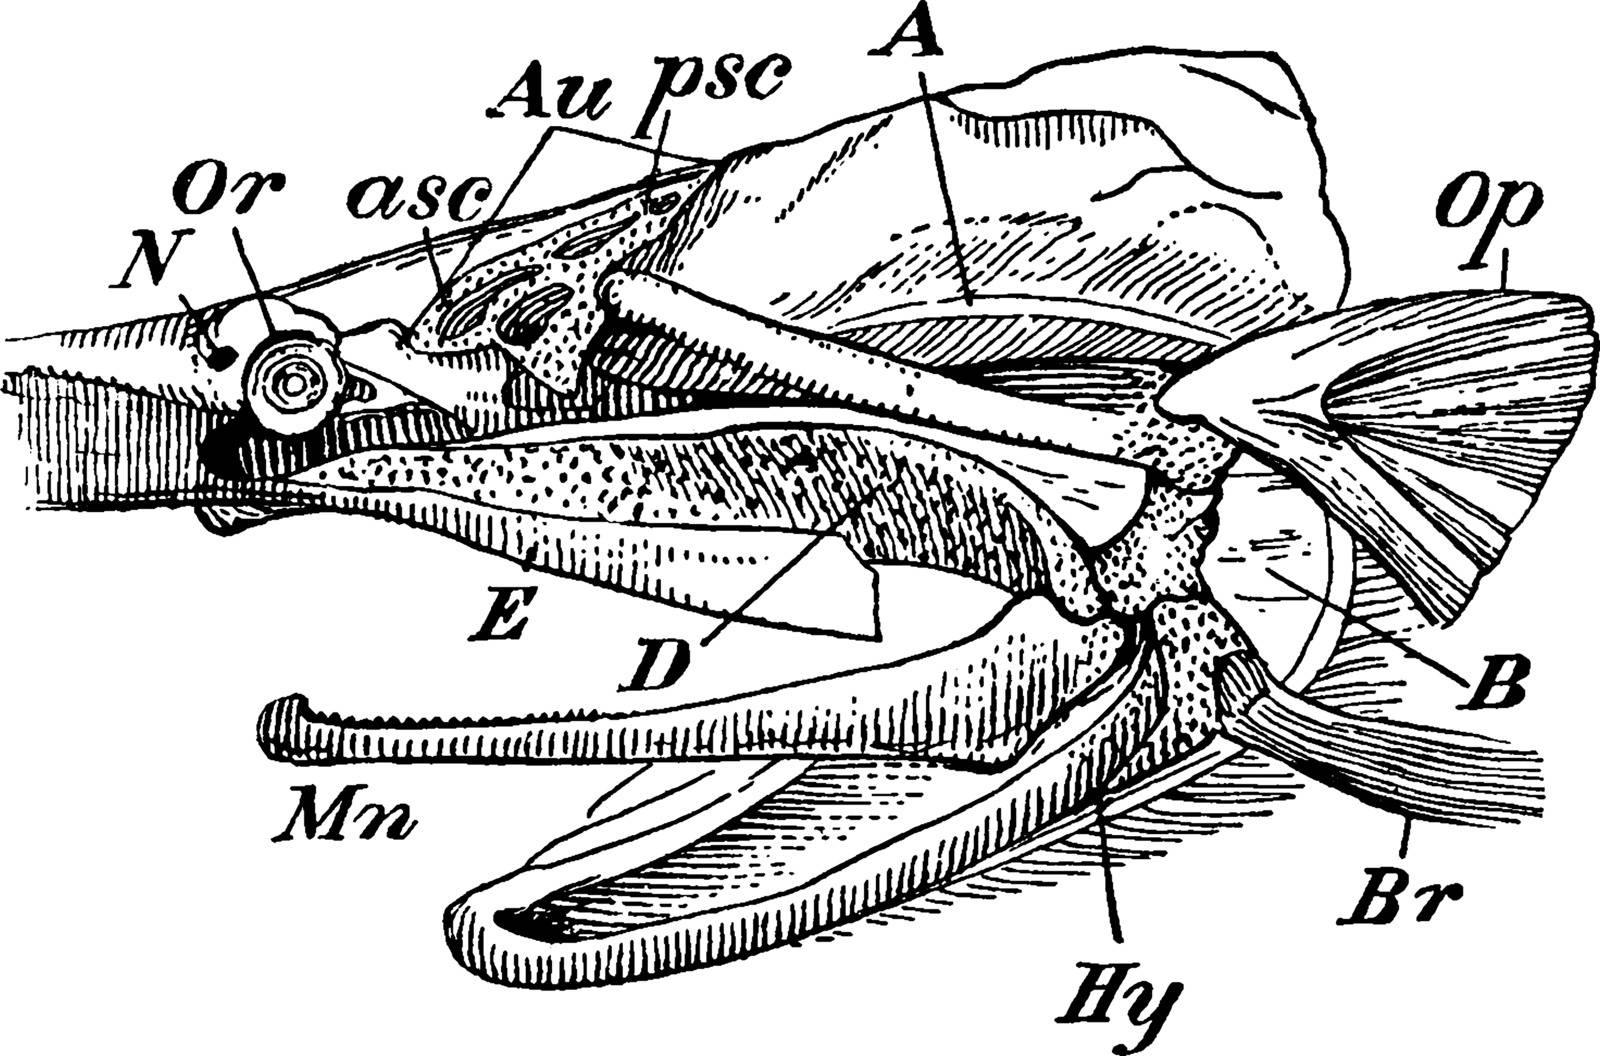 The Skull of a Paddle Fish with the Beak Removed, vintage illust by Morphart